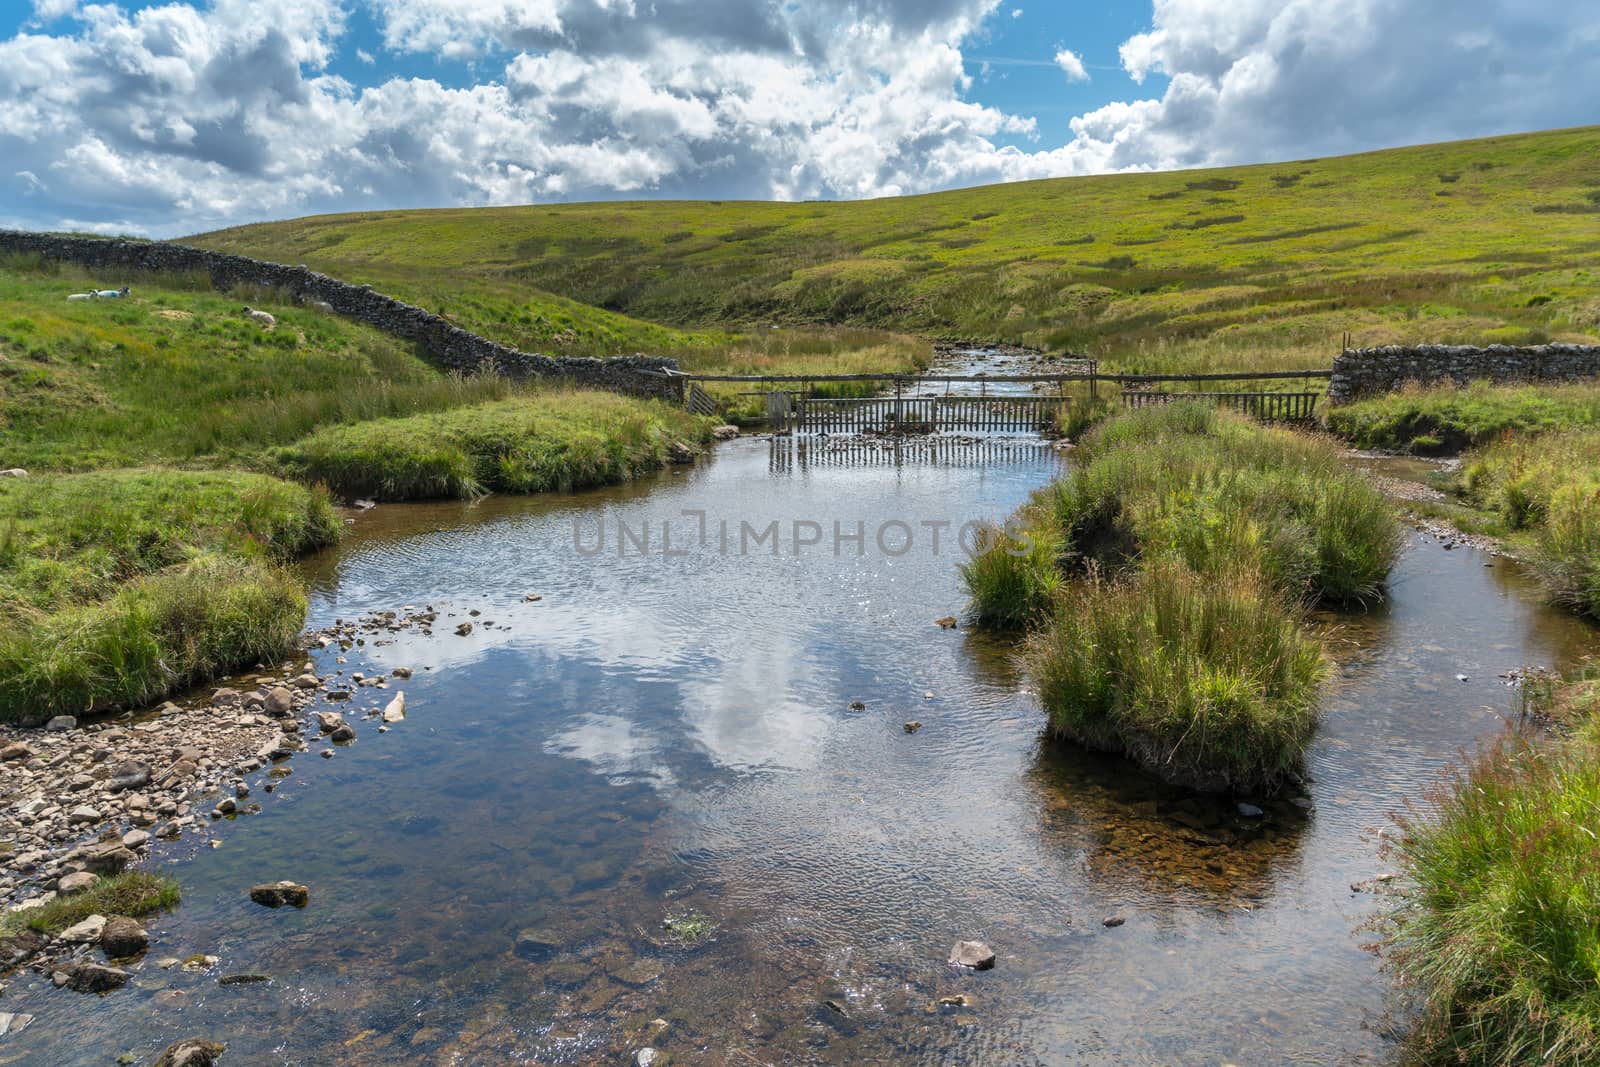 View along the River Twiss near Ingleton in Yorkshire by phil_bird